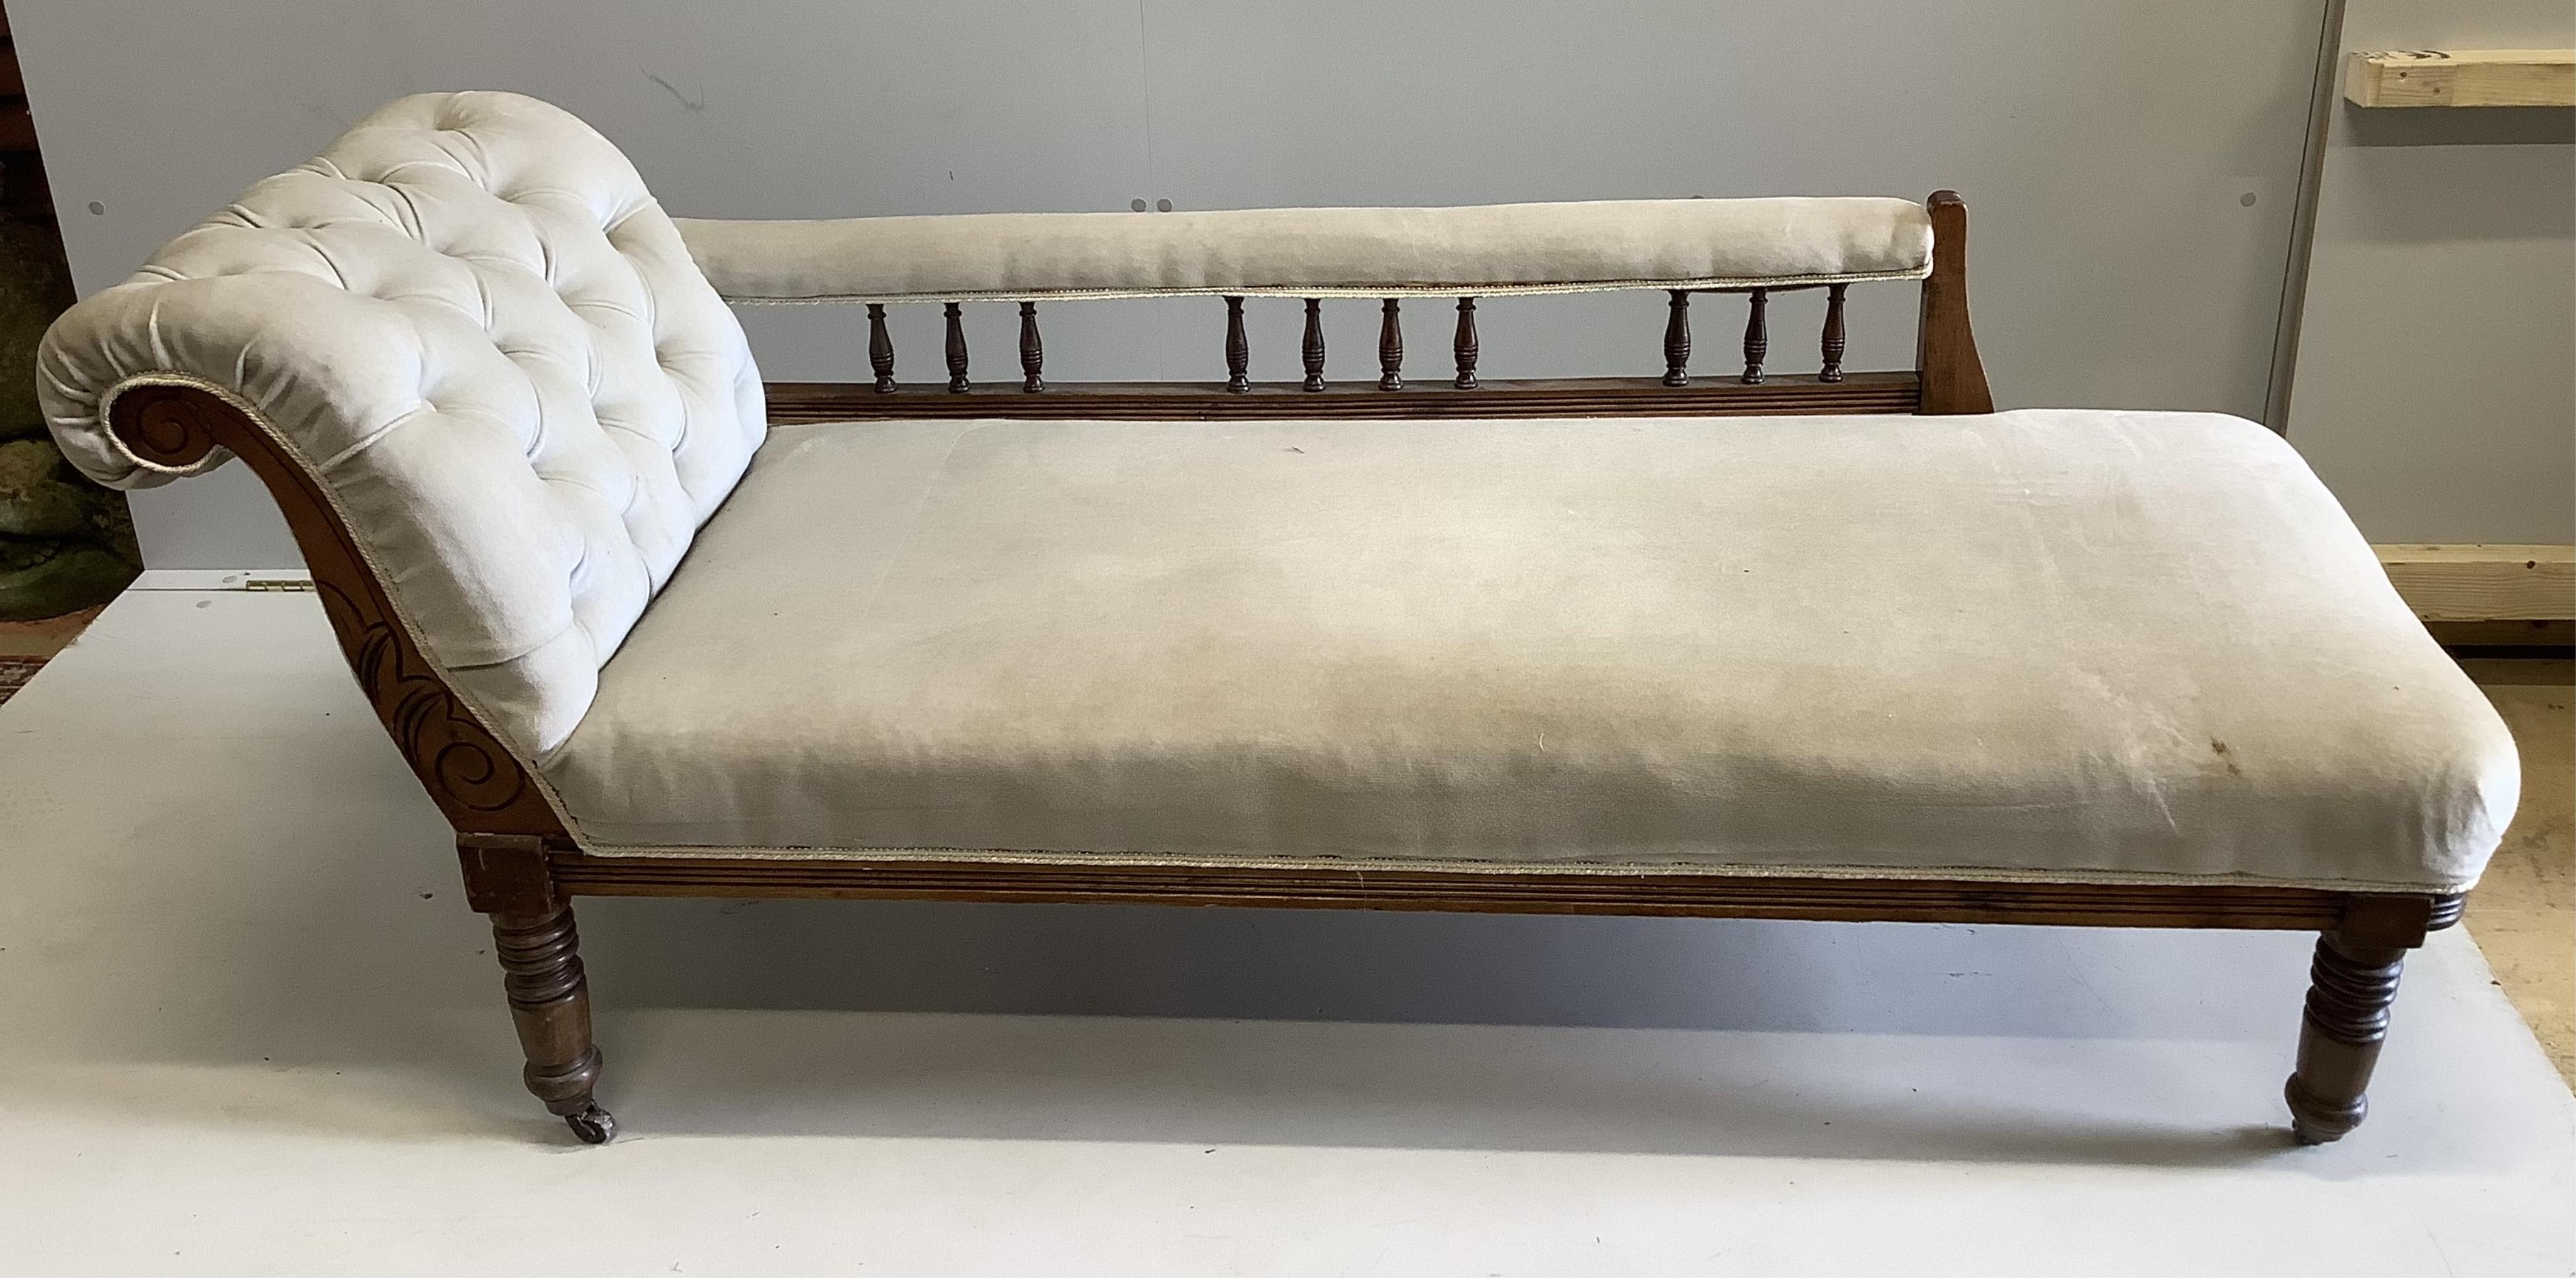 A late Victorian mahogany chaise longue, width 170cm, depth 58cm, height 70cm